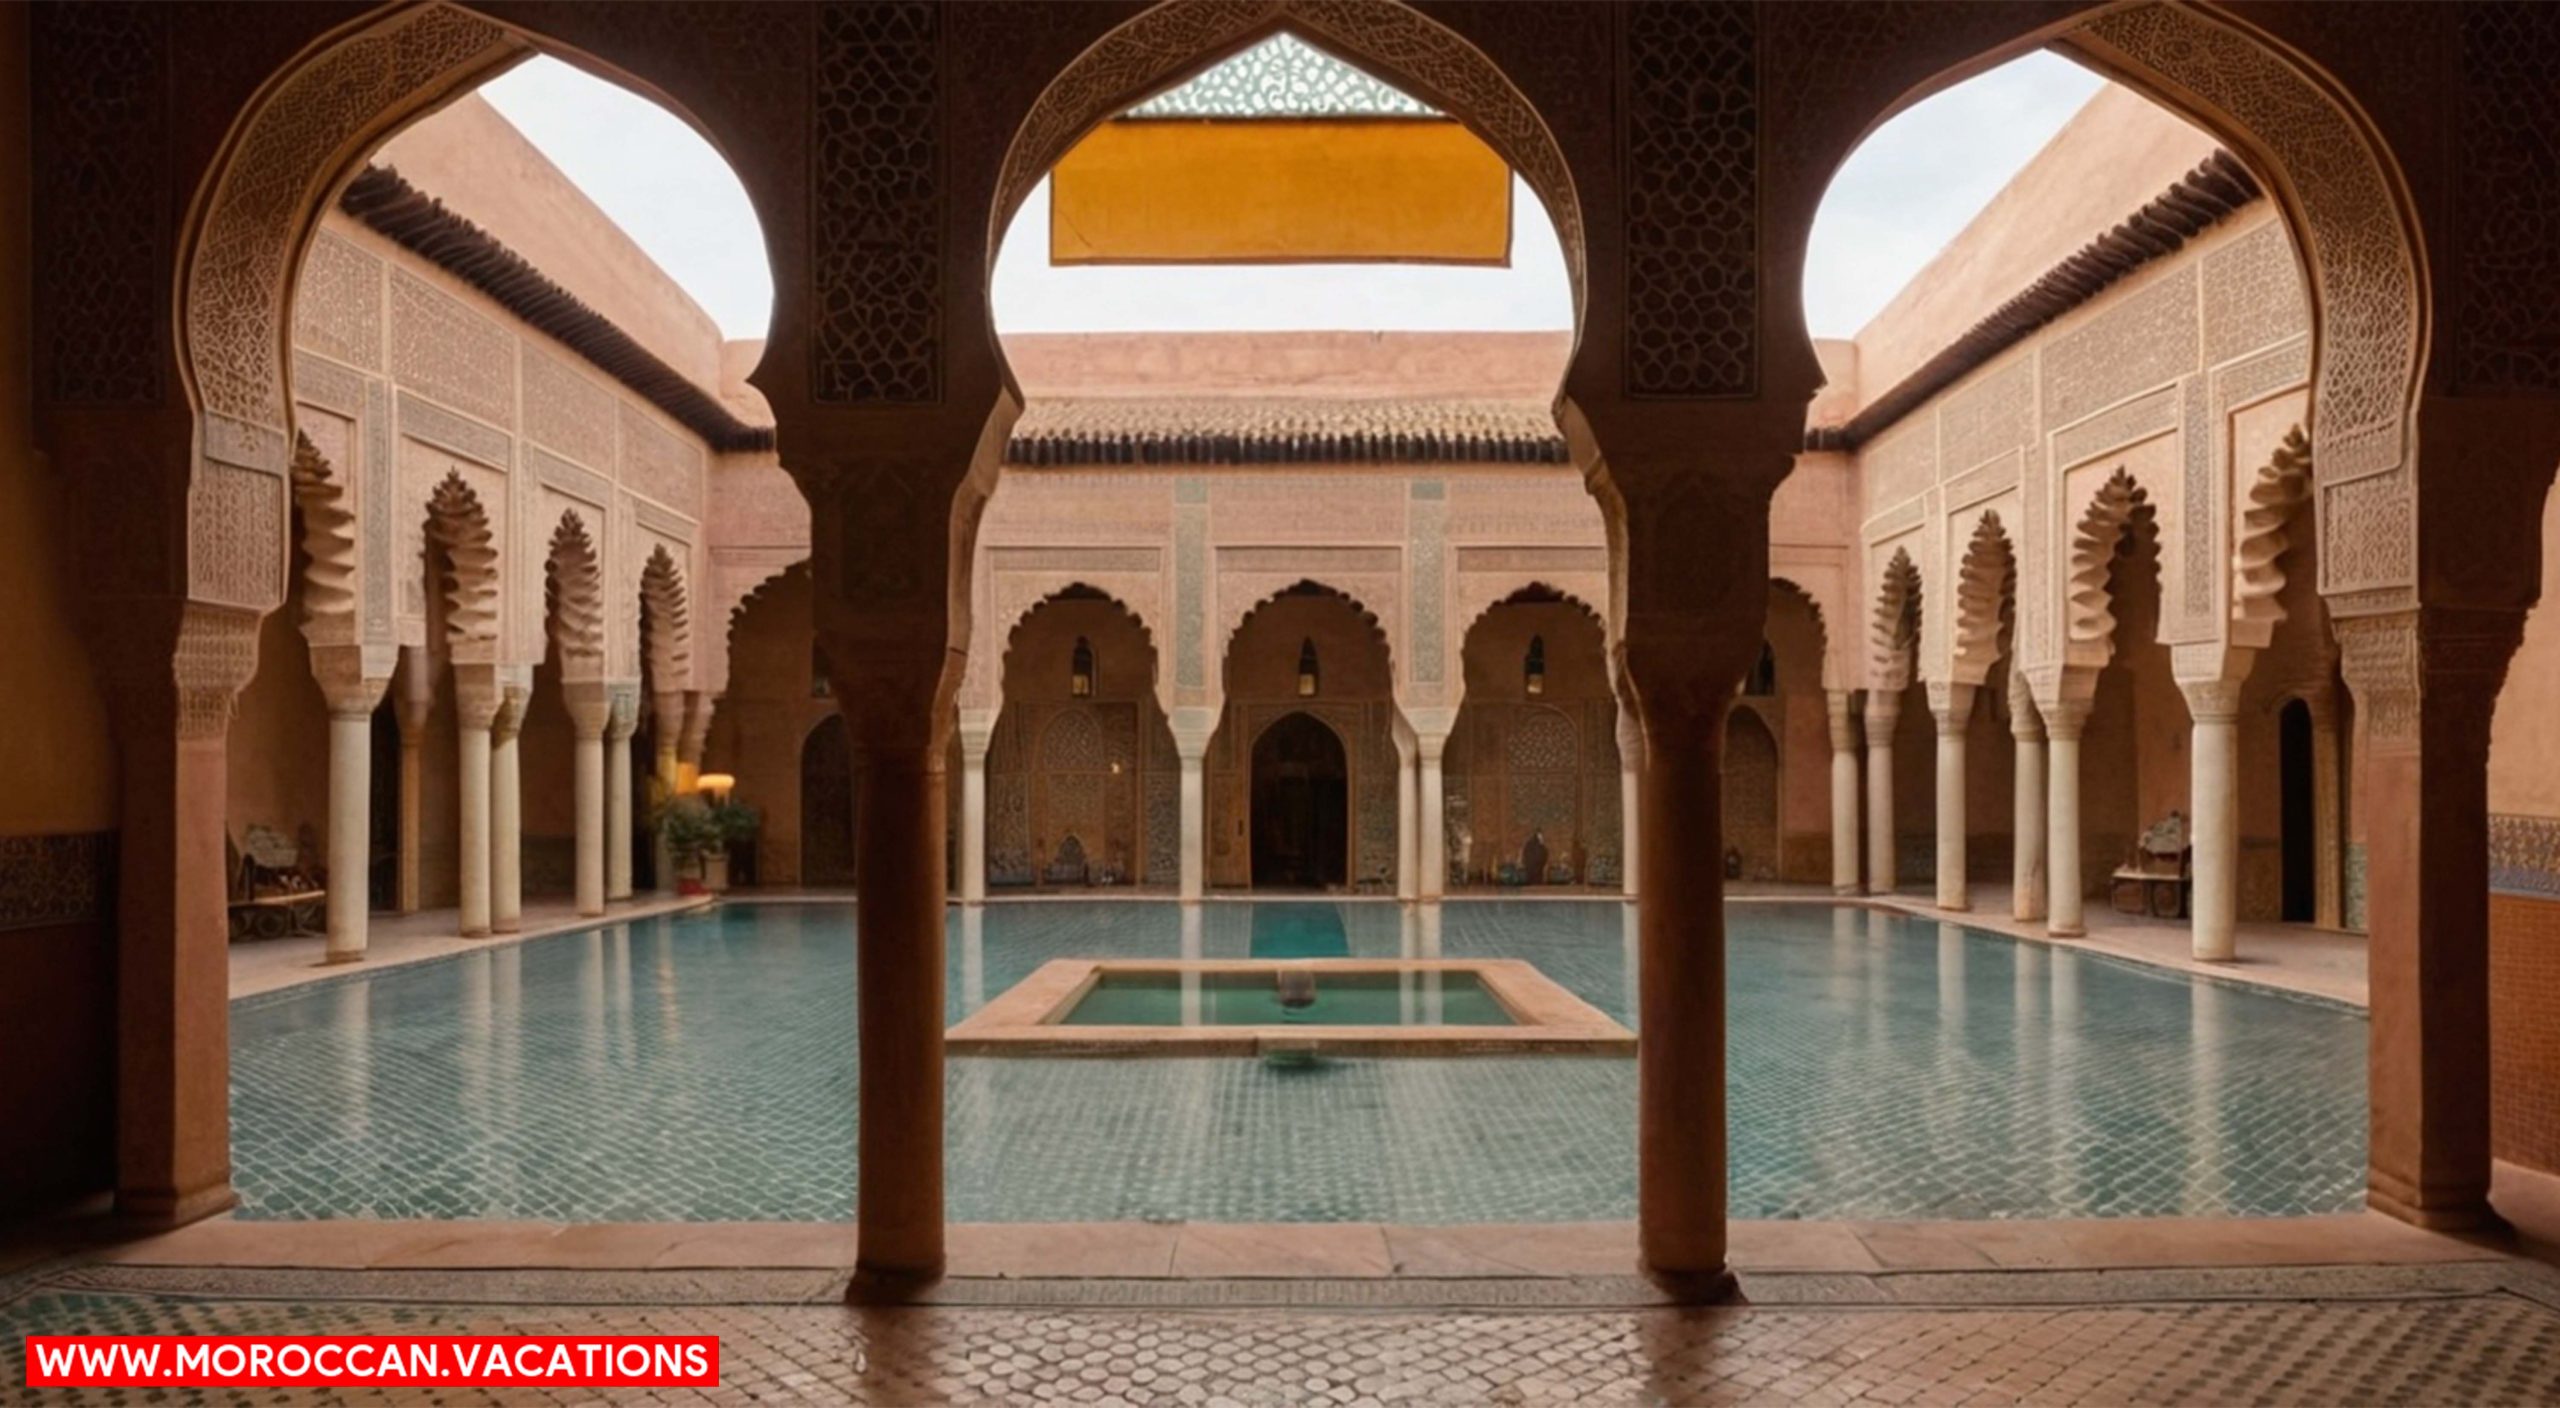 The intricate geometric patterns adorning the arches, windows, and courtyards.